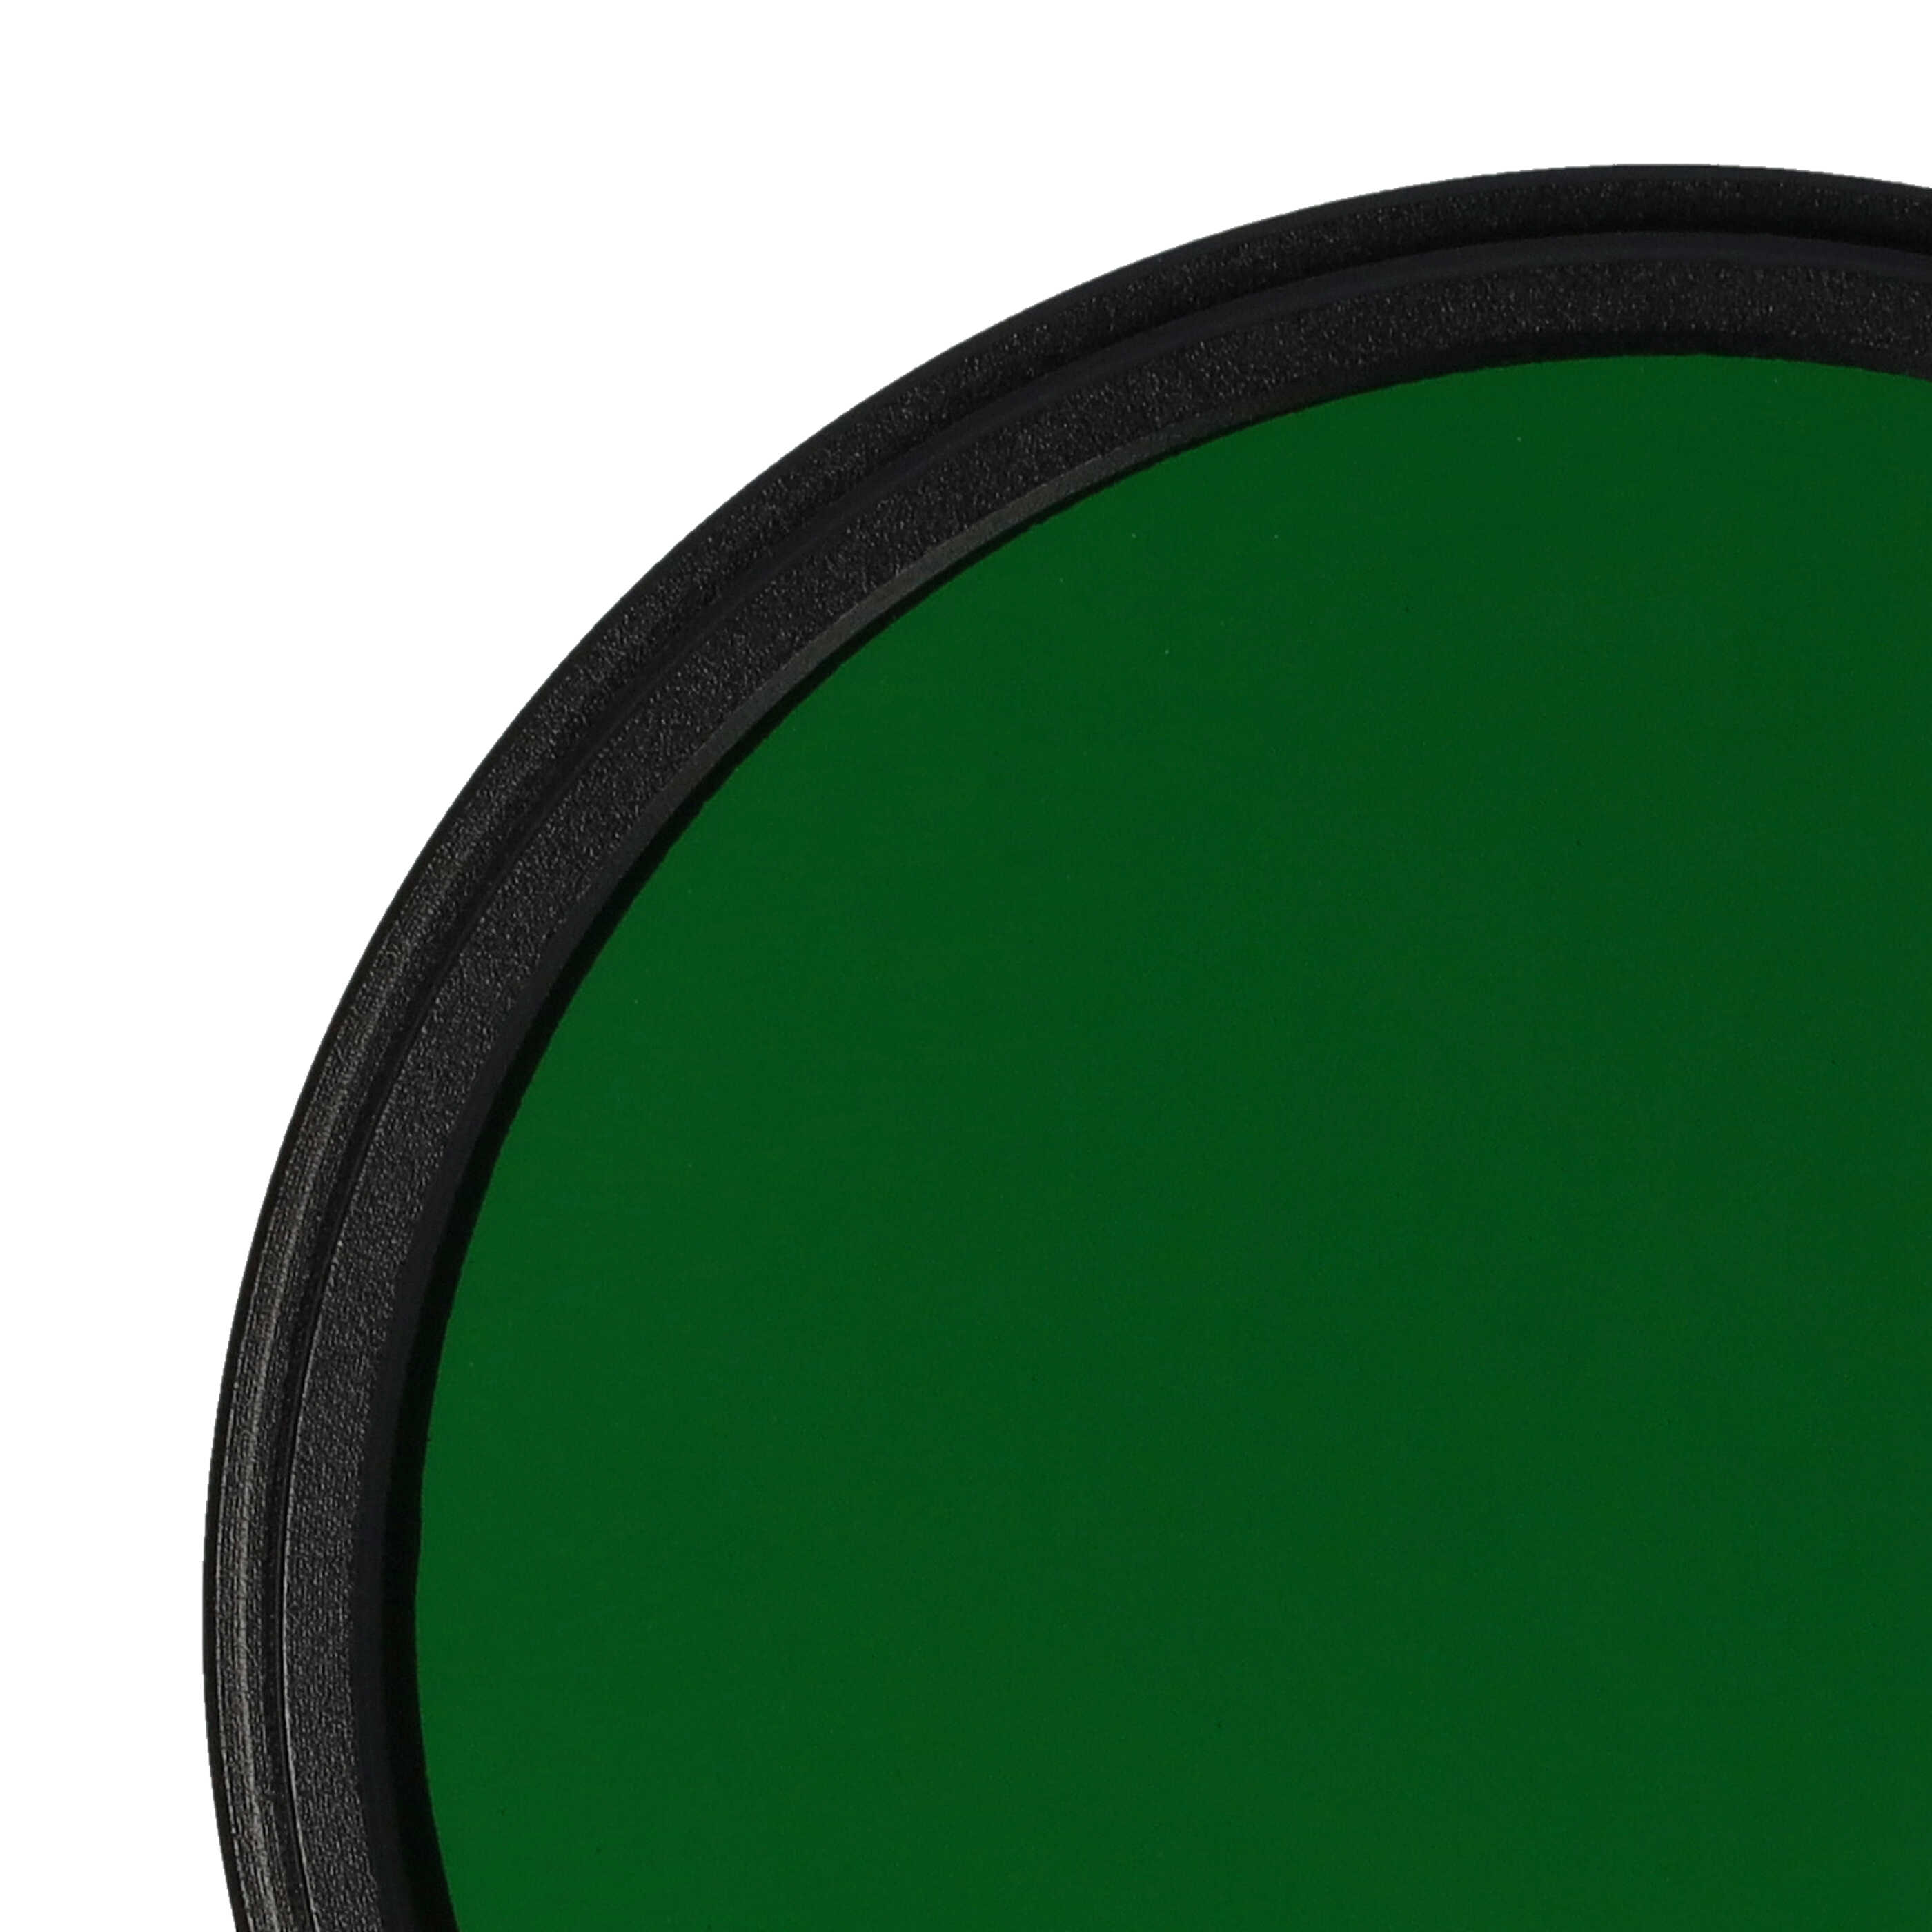 Coloured Filter, Green suitable for Camera Lenses with 55 mm Filter Thread - Green Filter